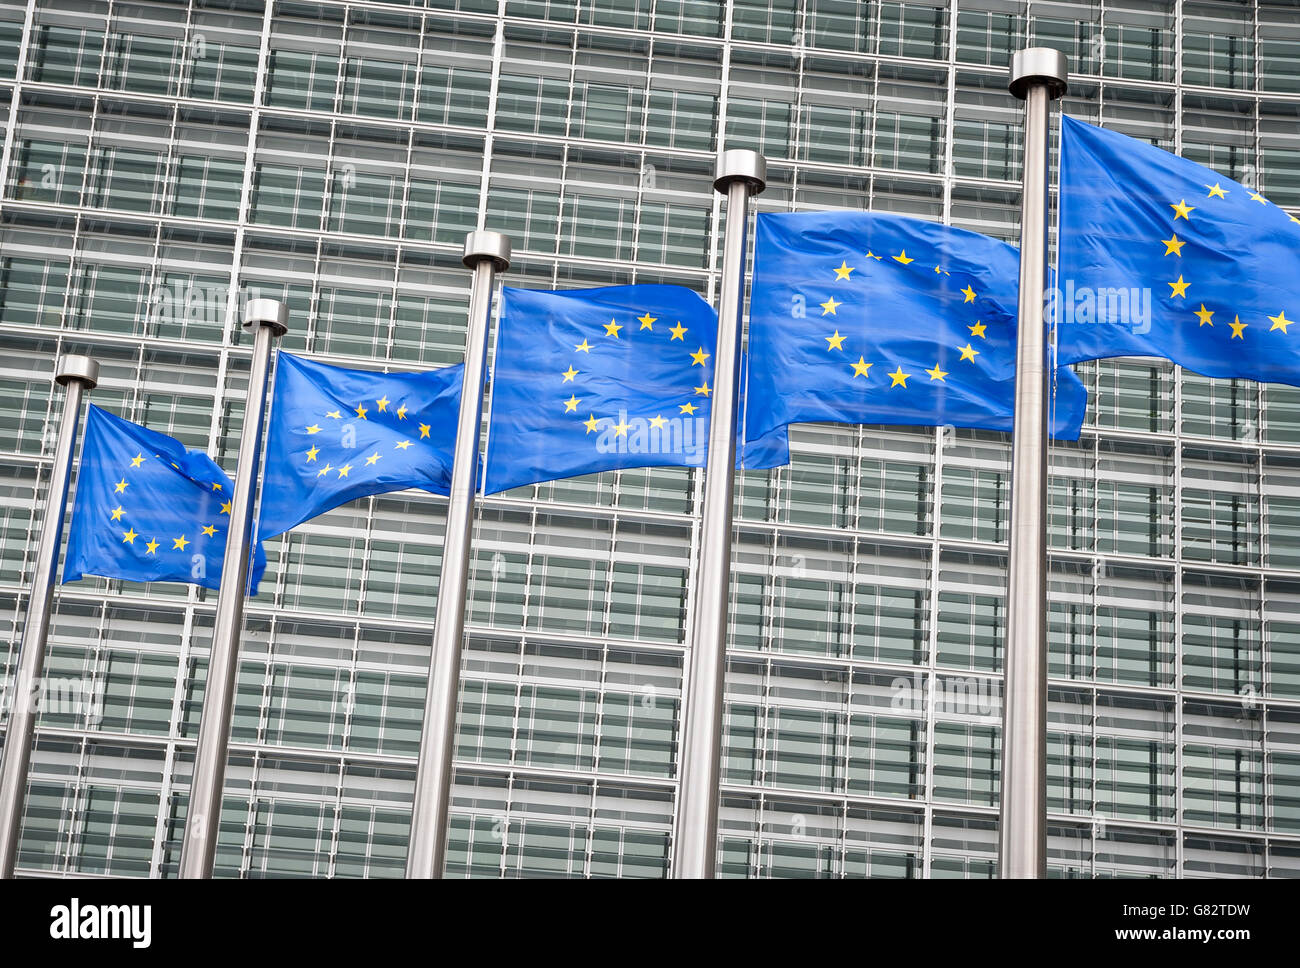 Row of EU European Union flags flying in front of administrative building at the EU headquarters in Brussels, Belgium Stock Photo